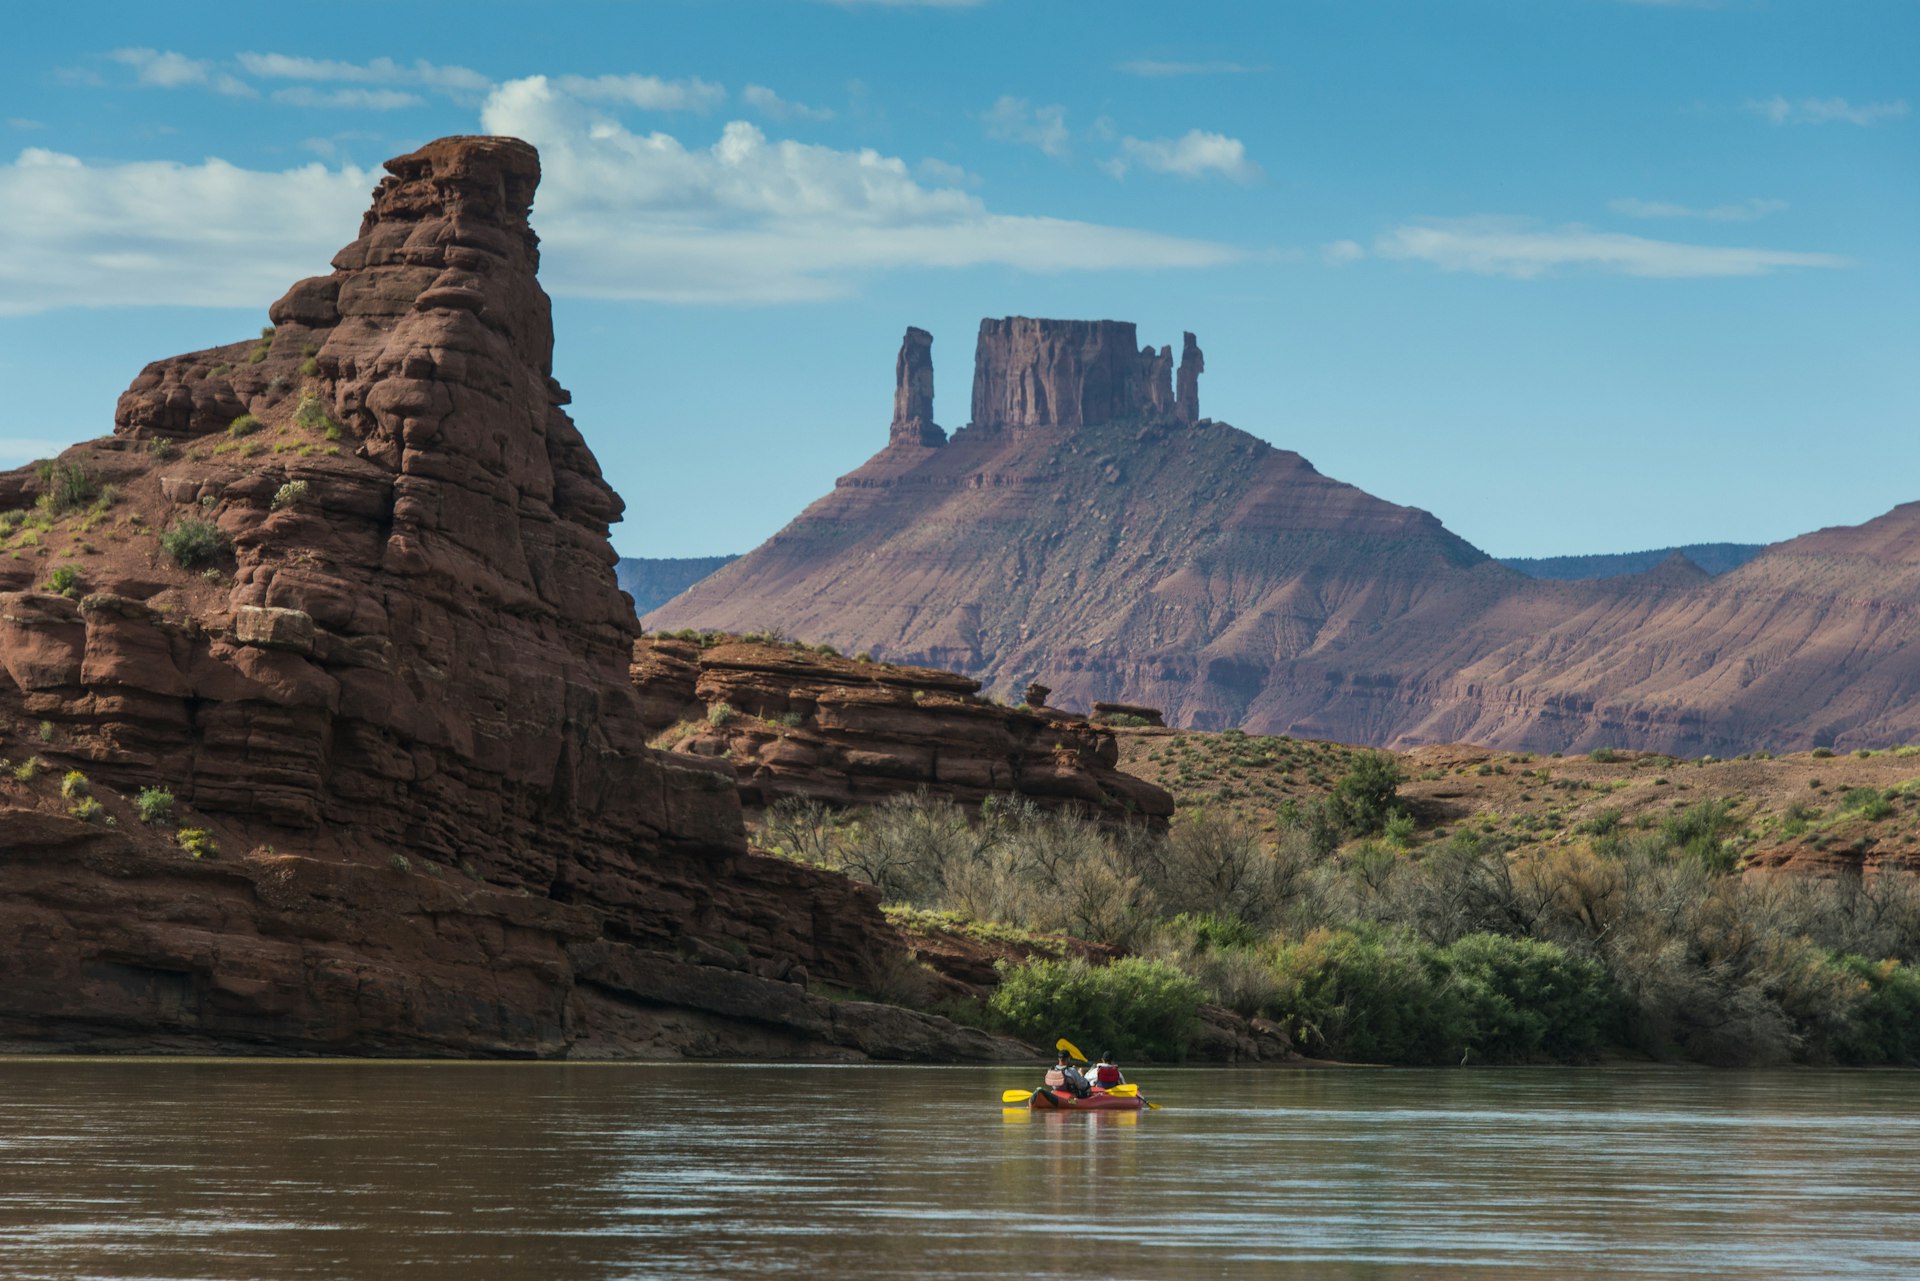 Couple kayaking down the Colorado River, with the large red rock formations of Castle Valley in the background.